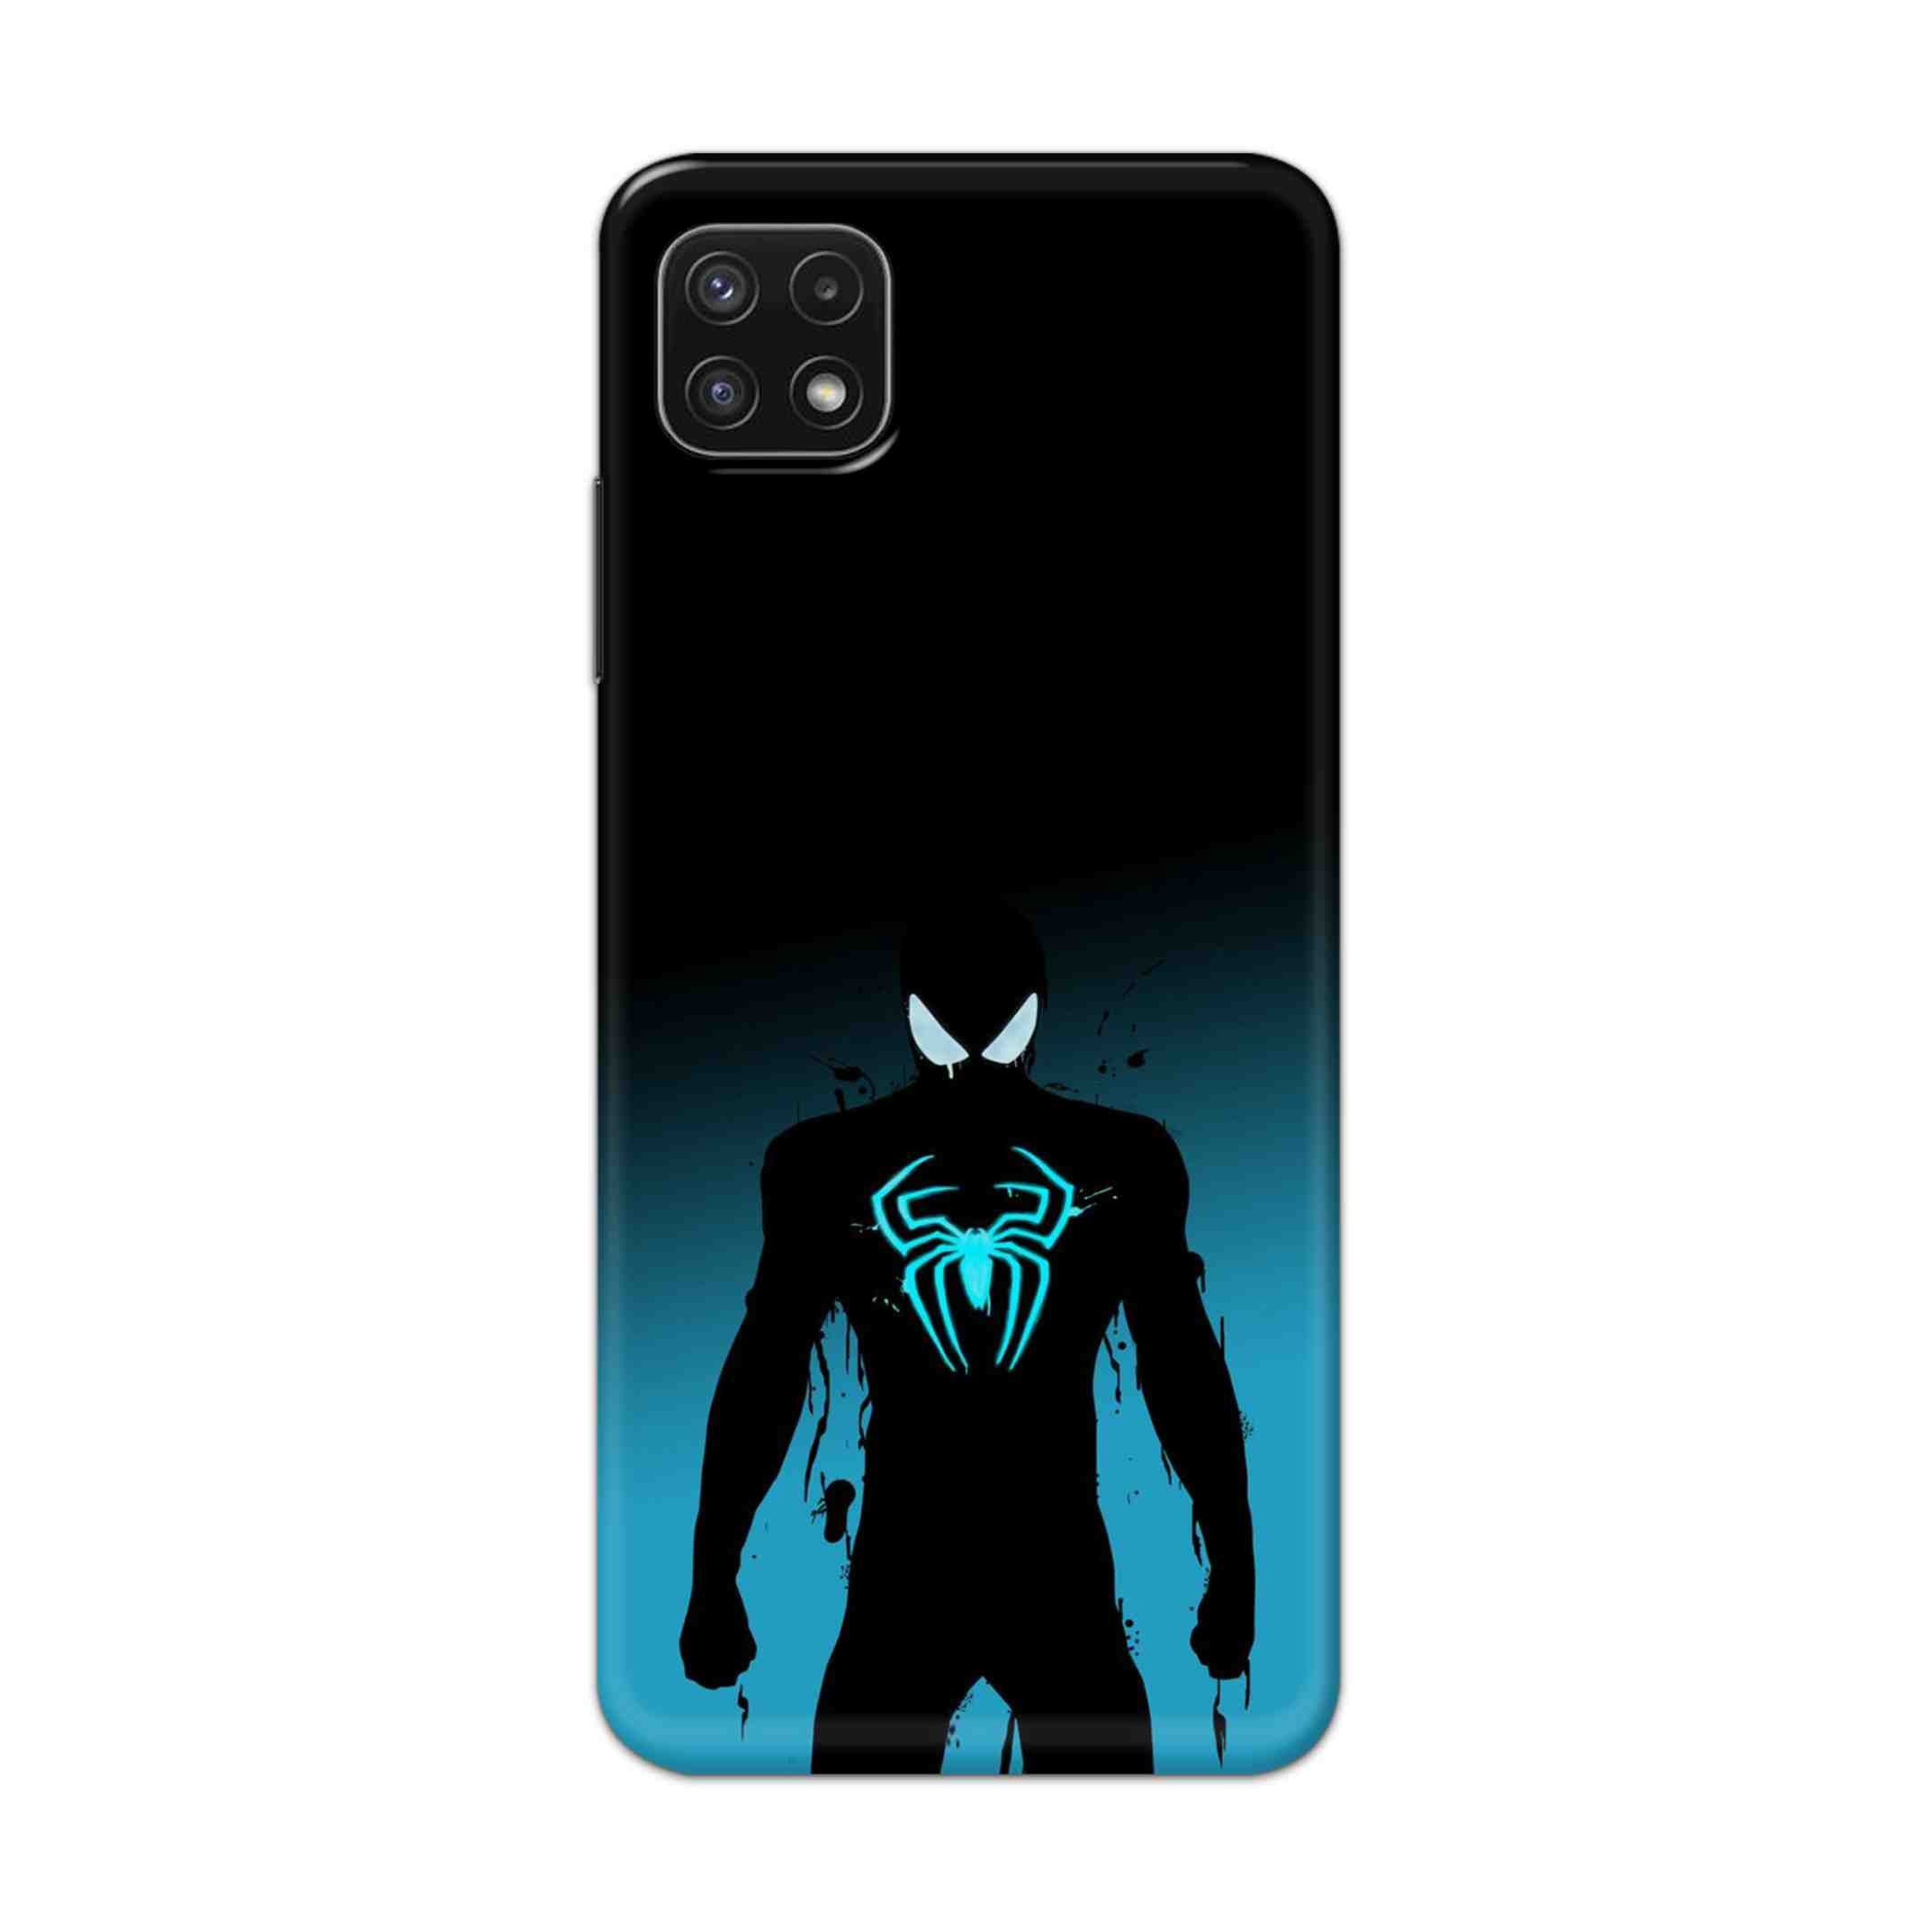 Buy Neon Spiderman Hard Back Mobile Phone Case Cover For Samsung A22 5G Online